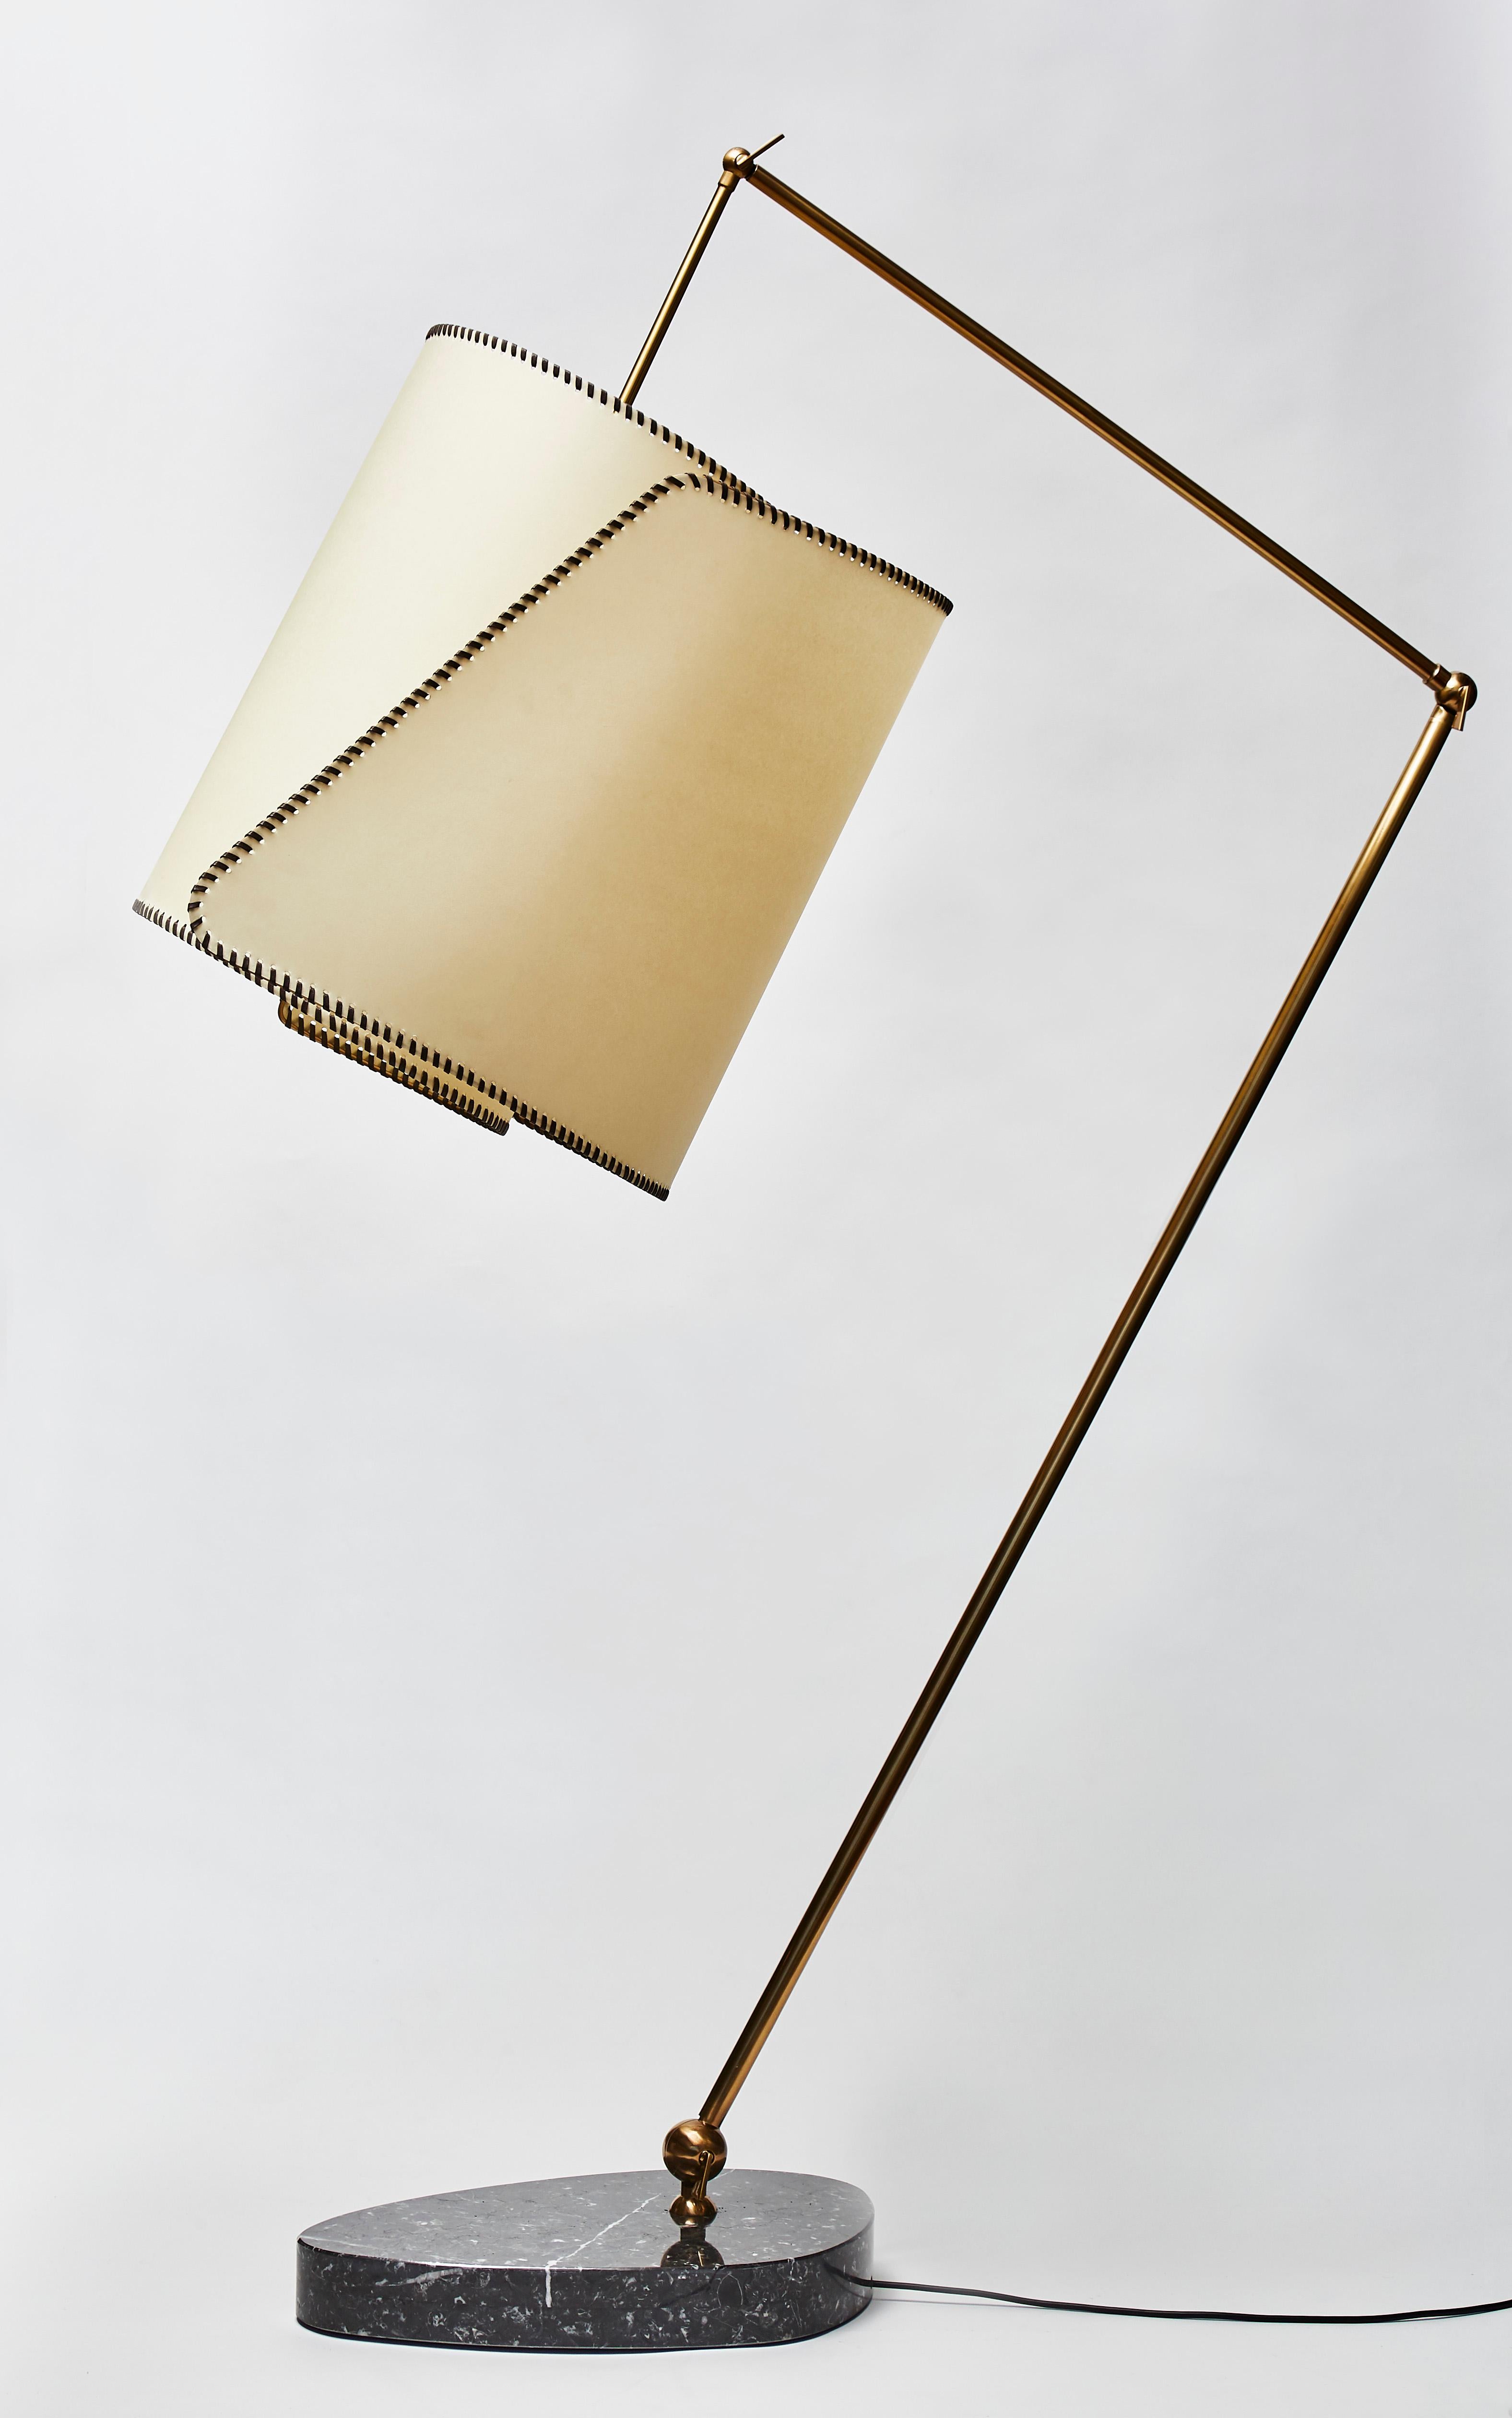 Titta floor lamp by the artist Diego Mardegan exclusively for Glustin Luminaires.

Beautiful vortex shade made of a brass structure, parchemin paper and waxed fabric hold by a patined articulated brass arm attached to a grey marble foot.